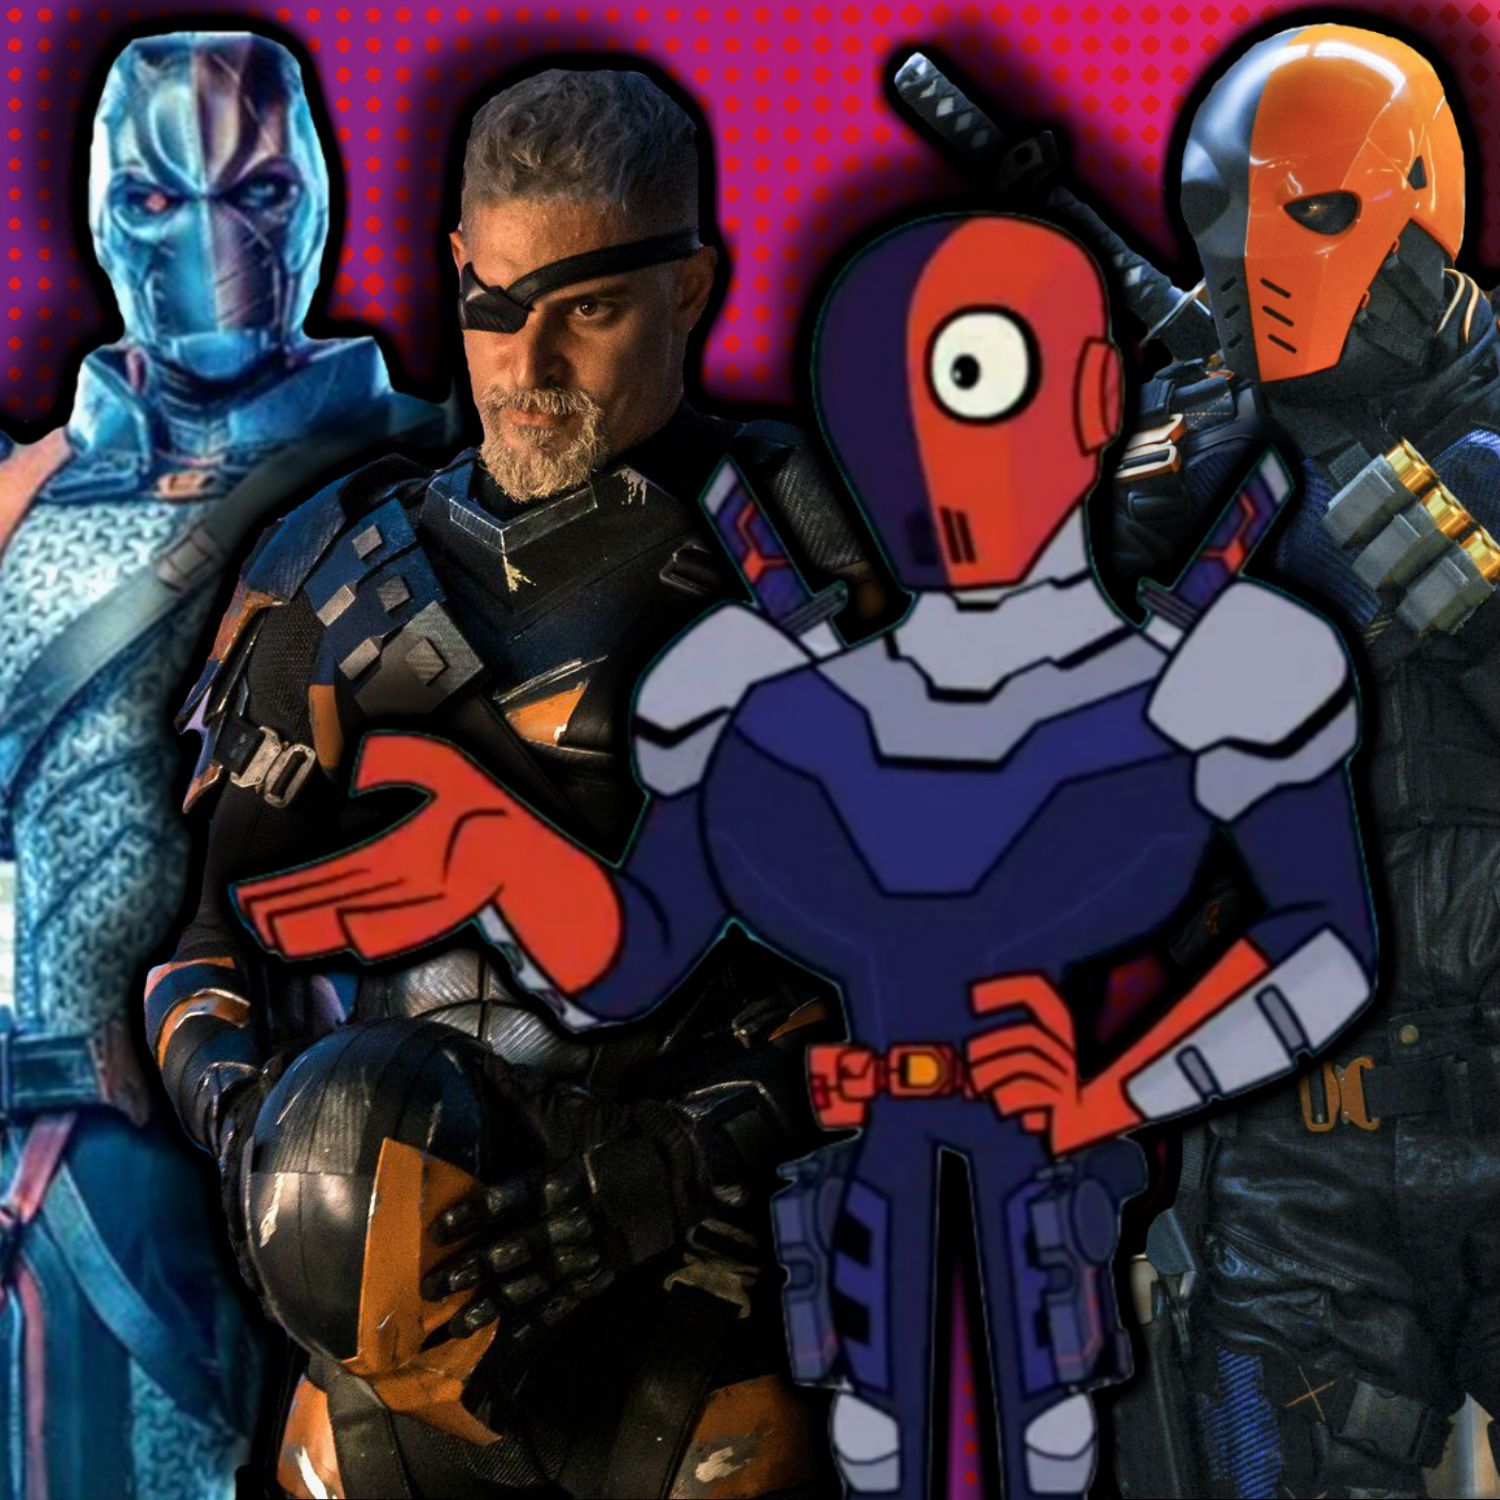 Deathstroke Phone Wallpaper by umbatman - Mobile Abyss